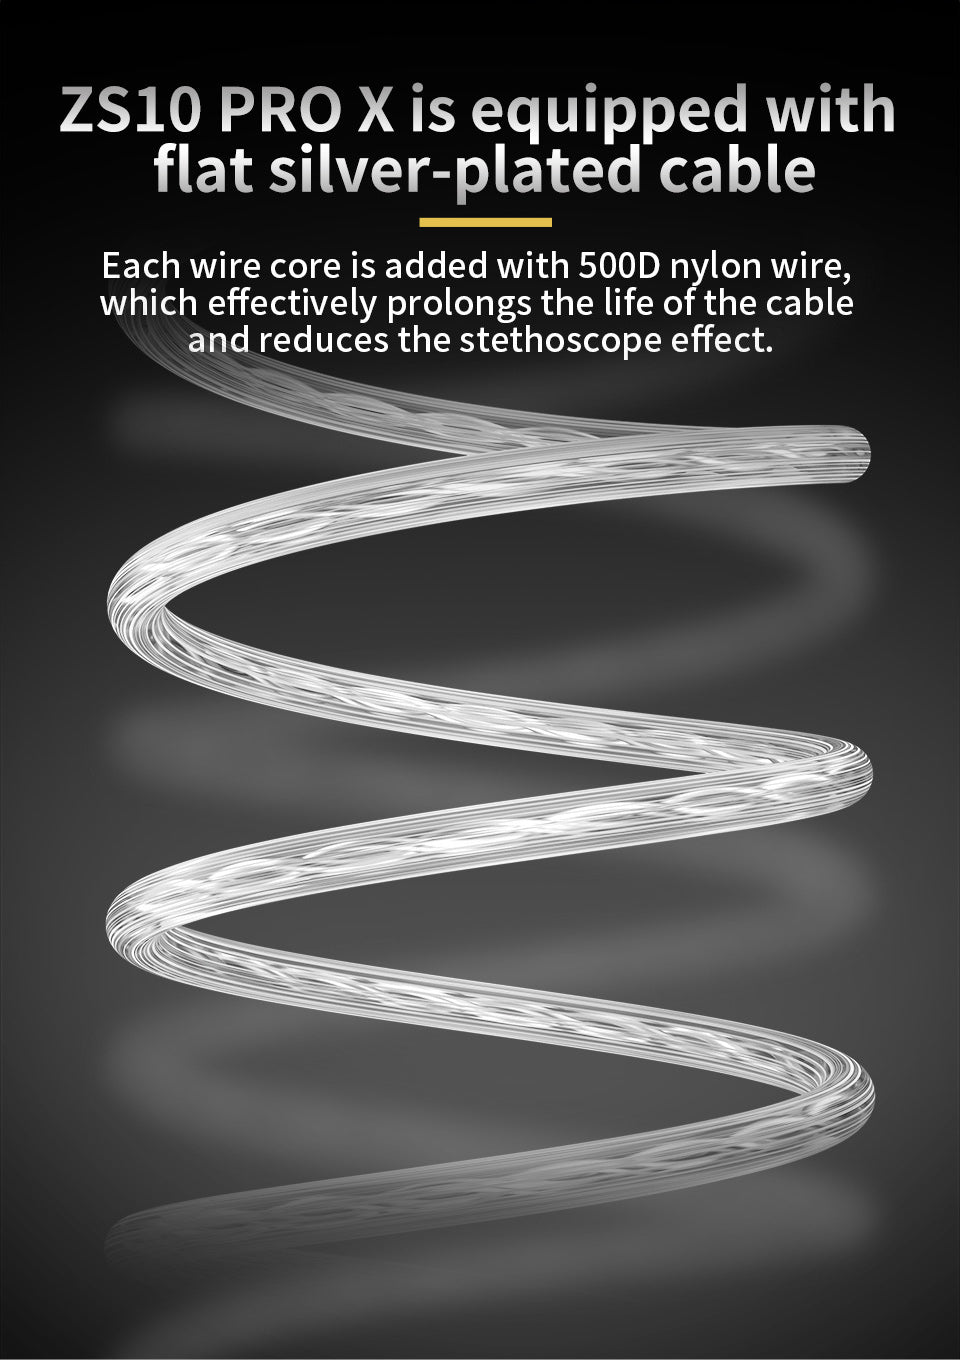 ZS10 PRO X is equipped with flat silver-plated cable Each wire core is added with 500D nylon wire, which effectively prolongs the life of the cable and reduces the stethoscope effect.